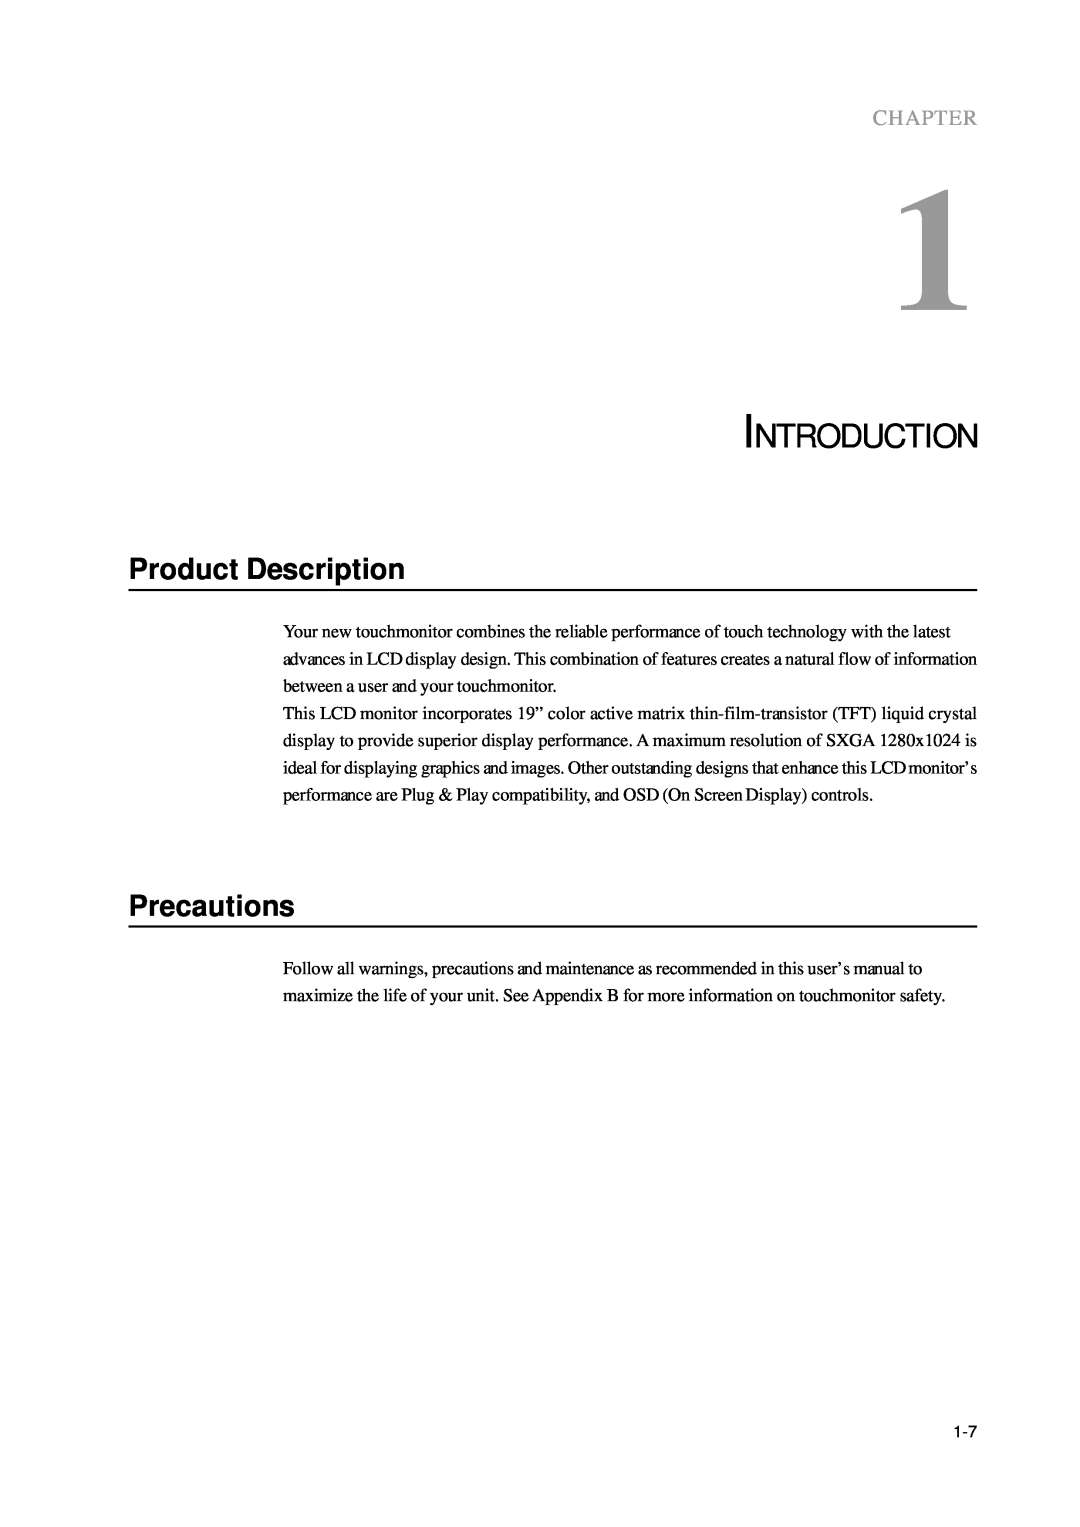 Elo TouchSystems 1000 Series manual Introduction, Product Description, Precautions, Chapter 